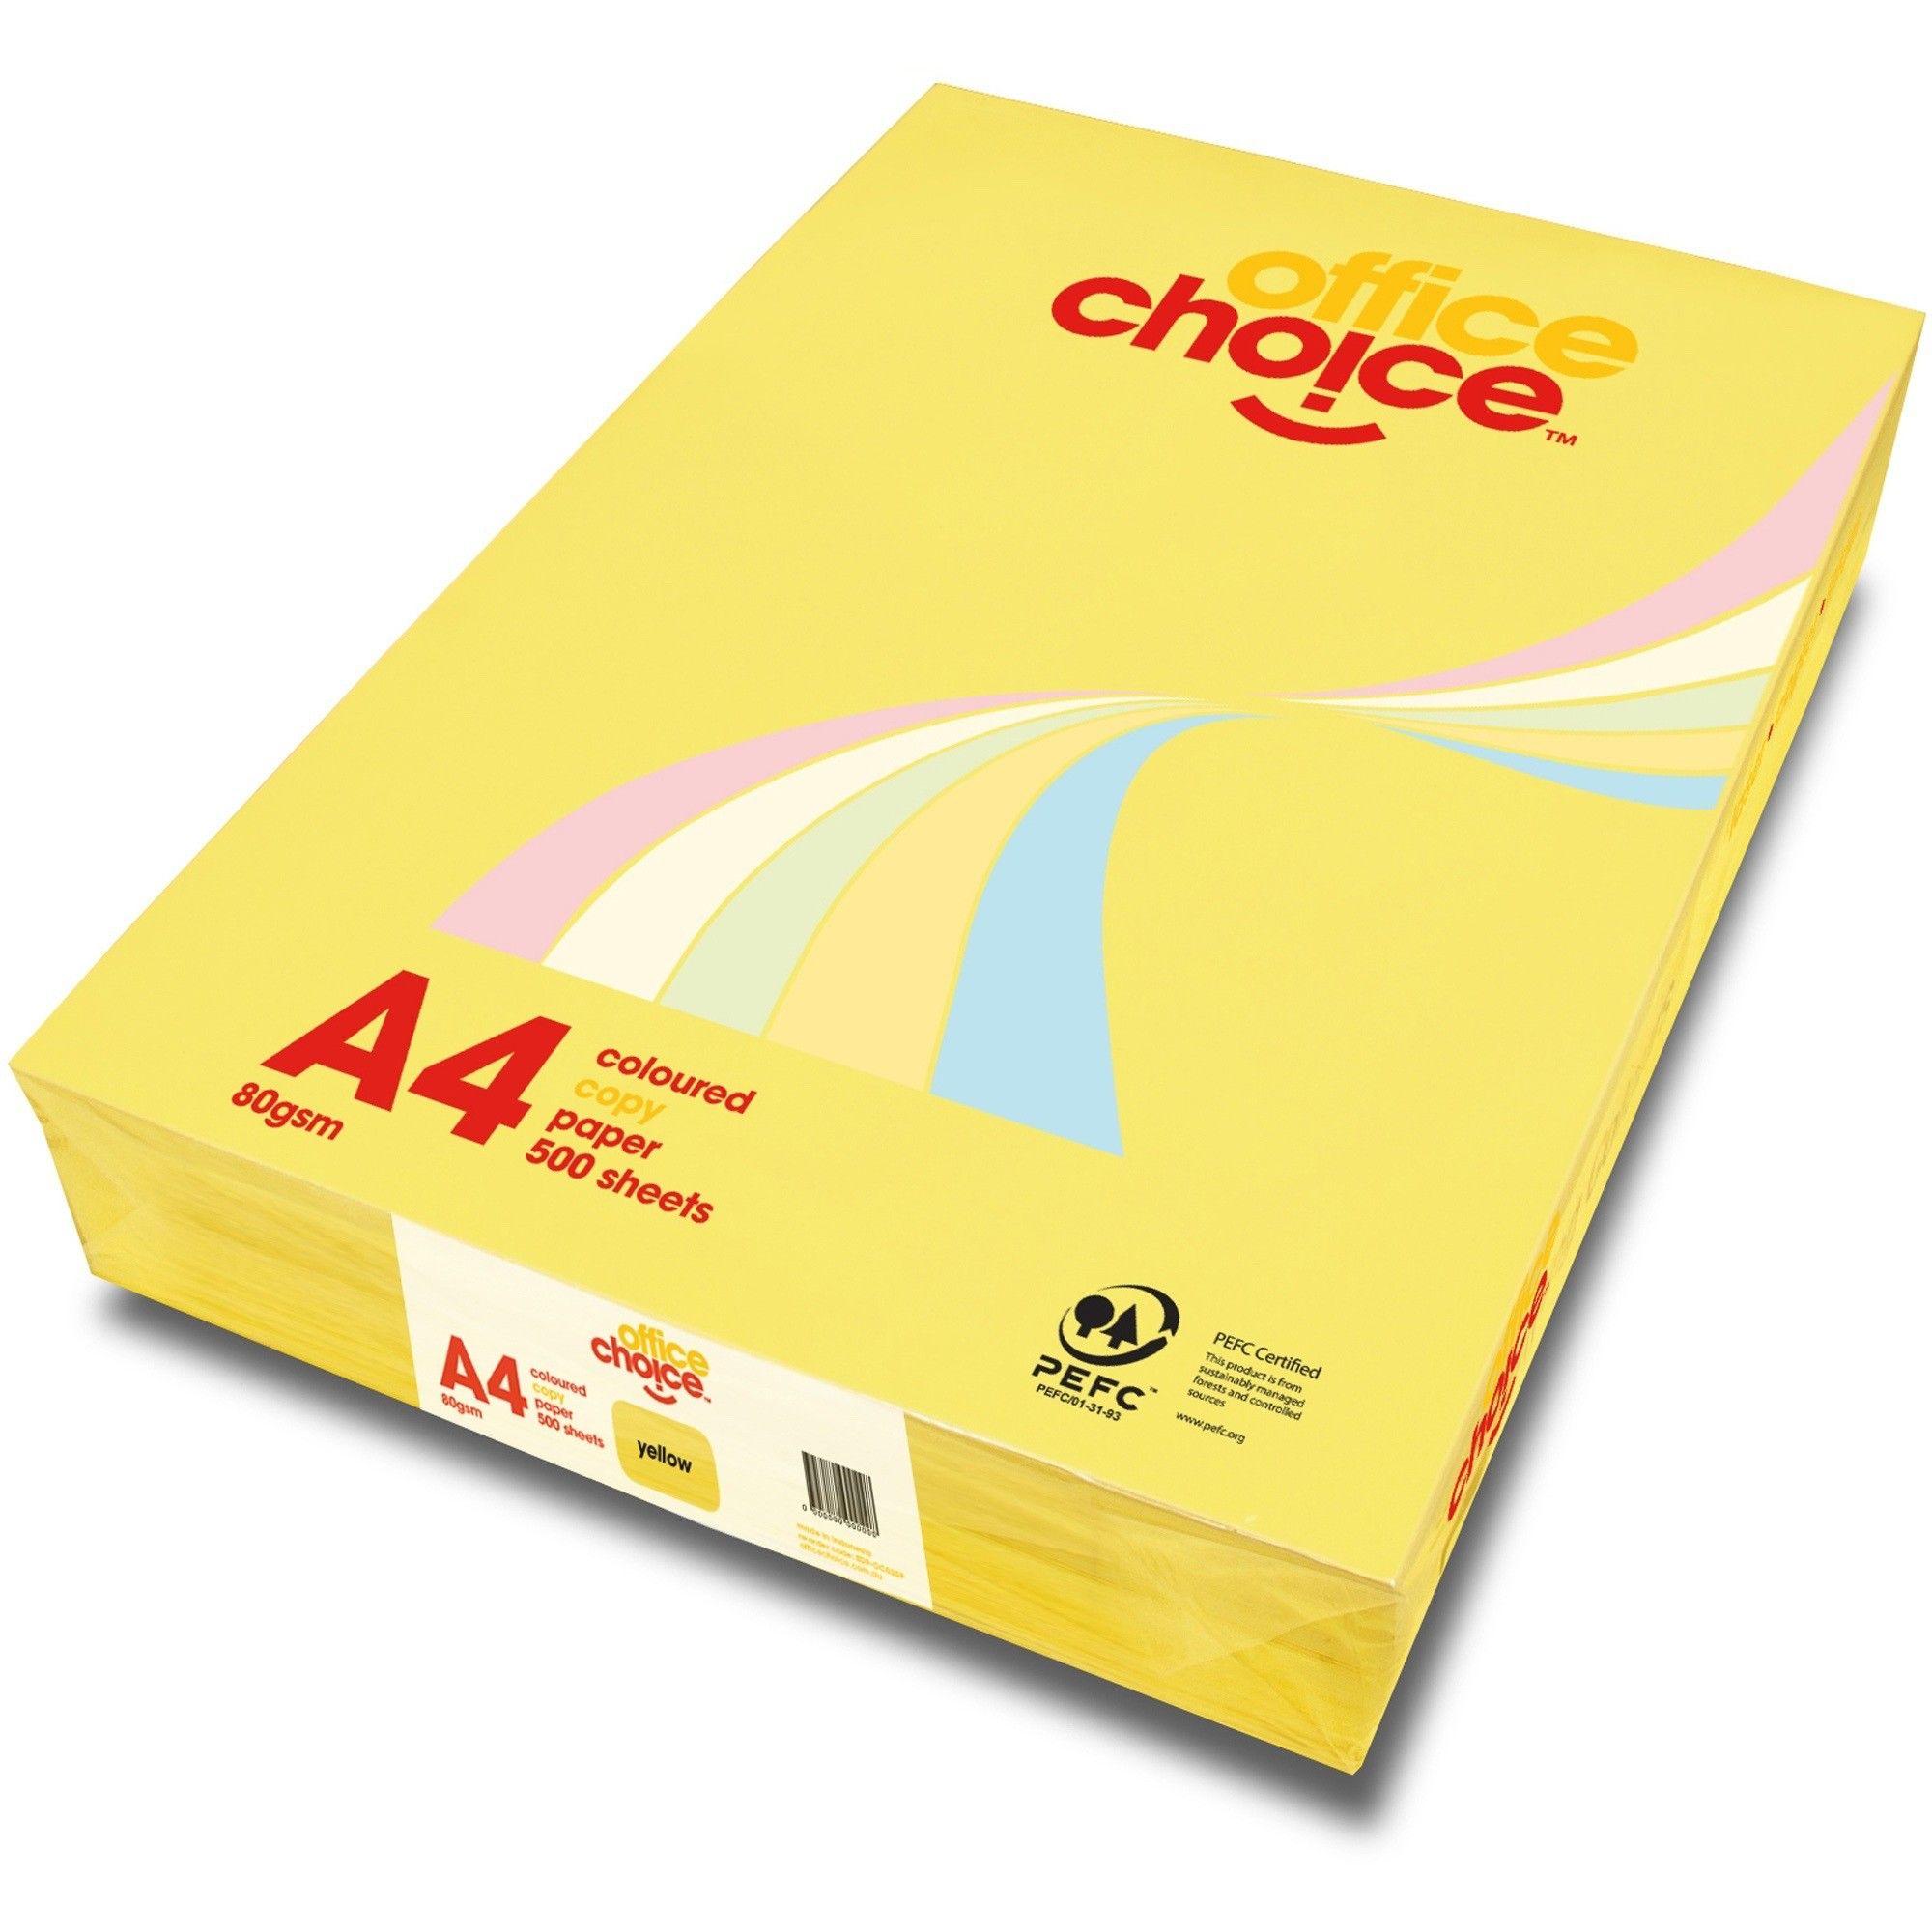 Yellow Sheets of Paper Logo - OFFICE CHOICE 80GSM A4 TINTED Paper Yellow 500 Sheets Ream - Paper ...